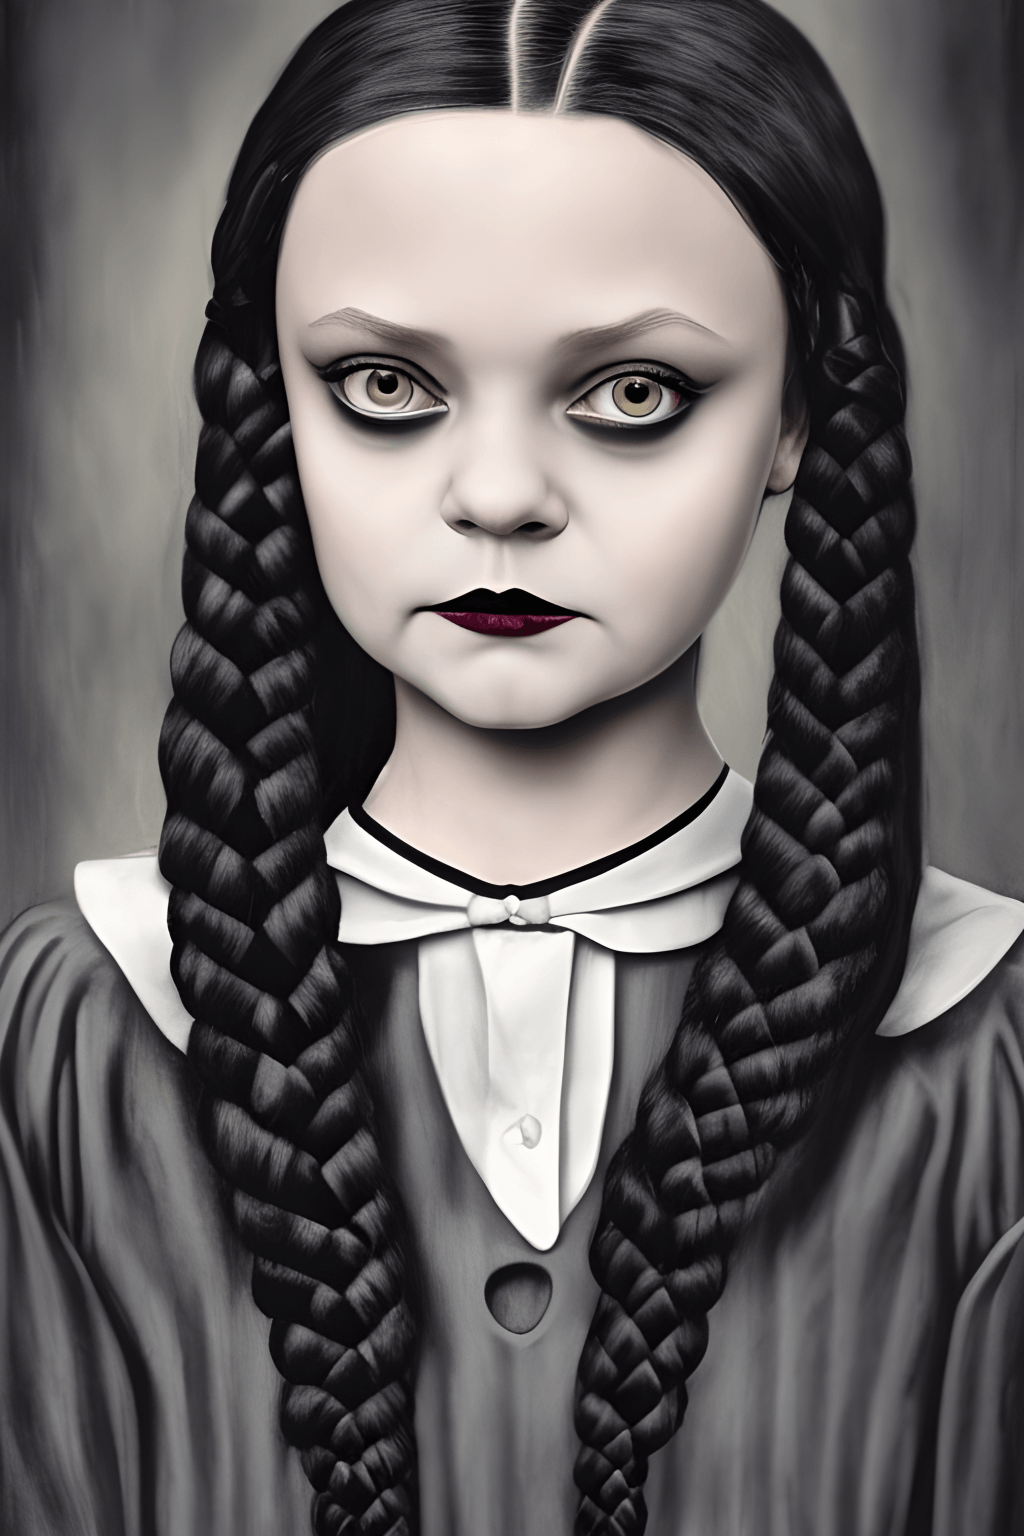 Wednesday Addams a Dark and Eerie Graphic · Creative Fabrica